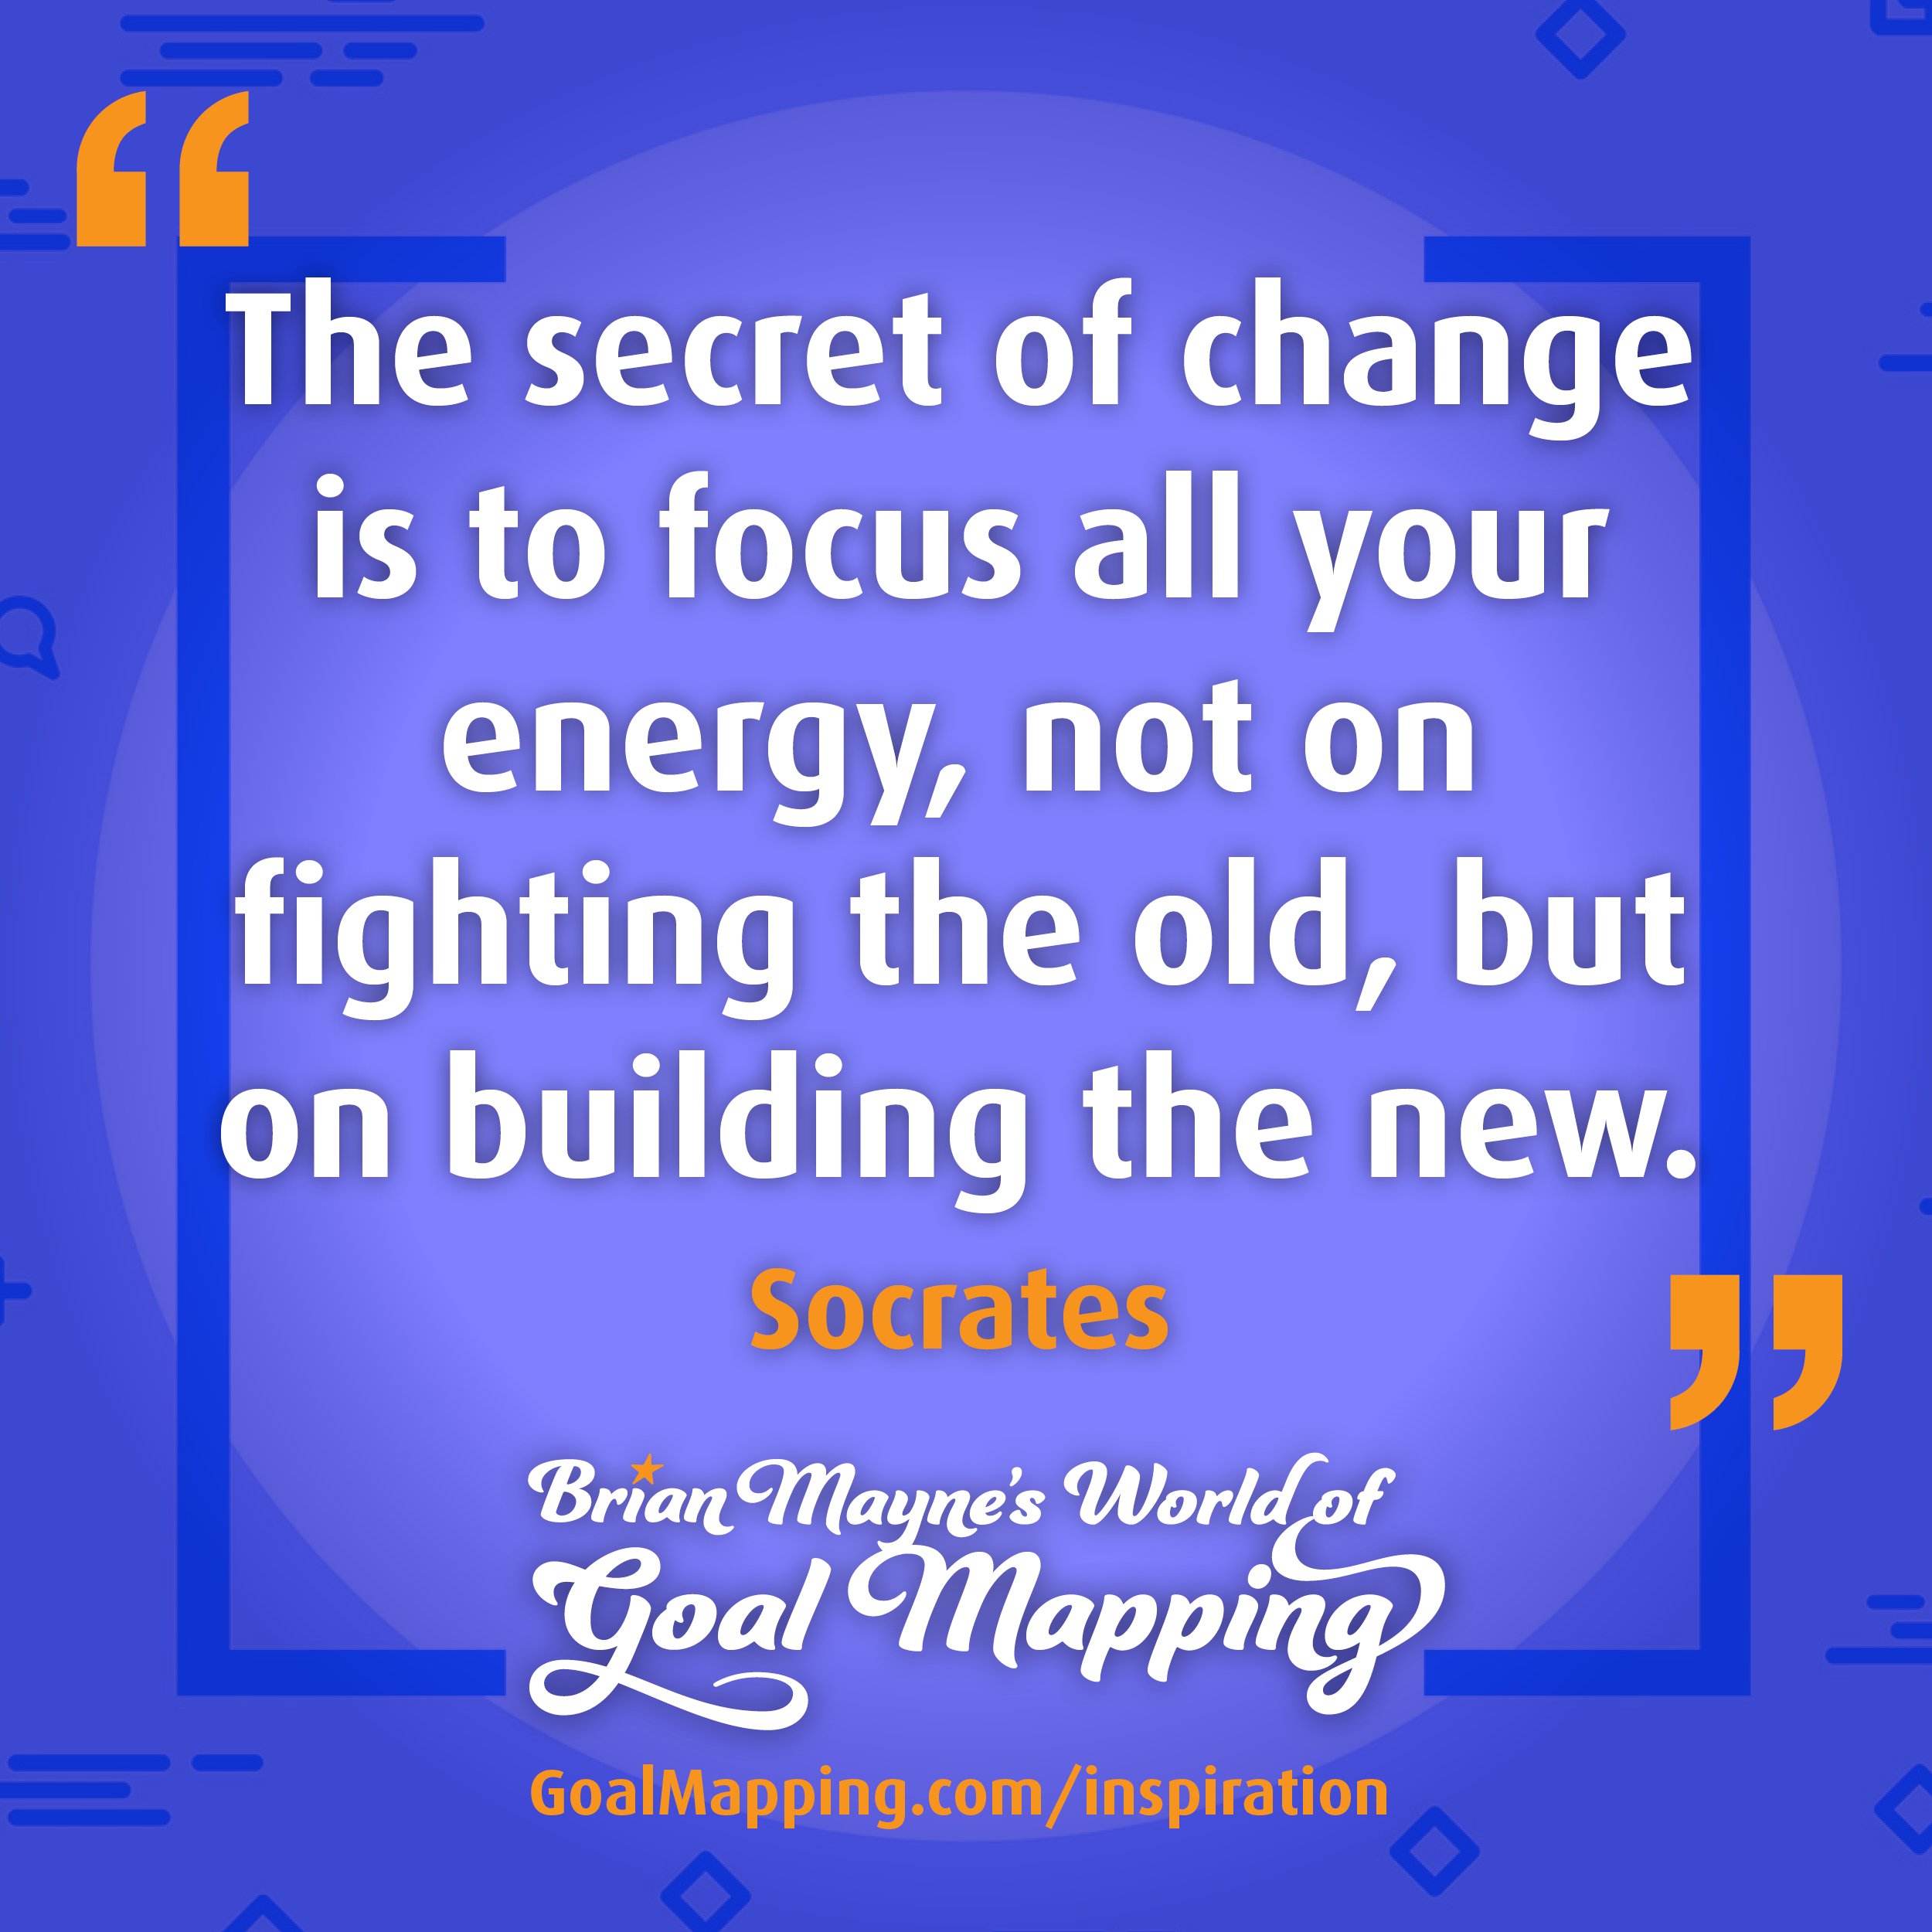 "The secret of change is to focus all your energy, not on fighting the old, but on building the new." Socrates